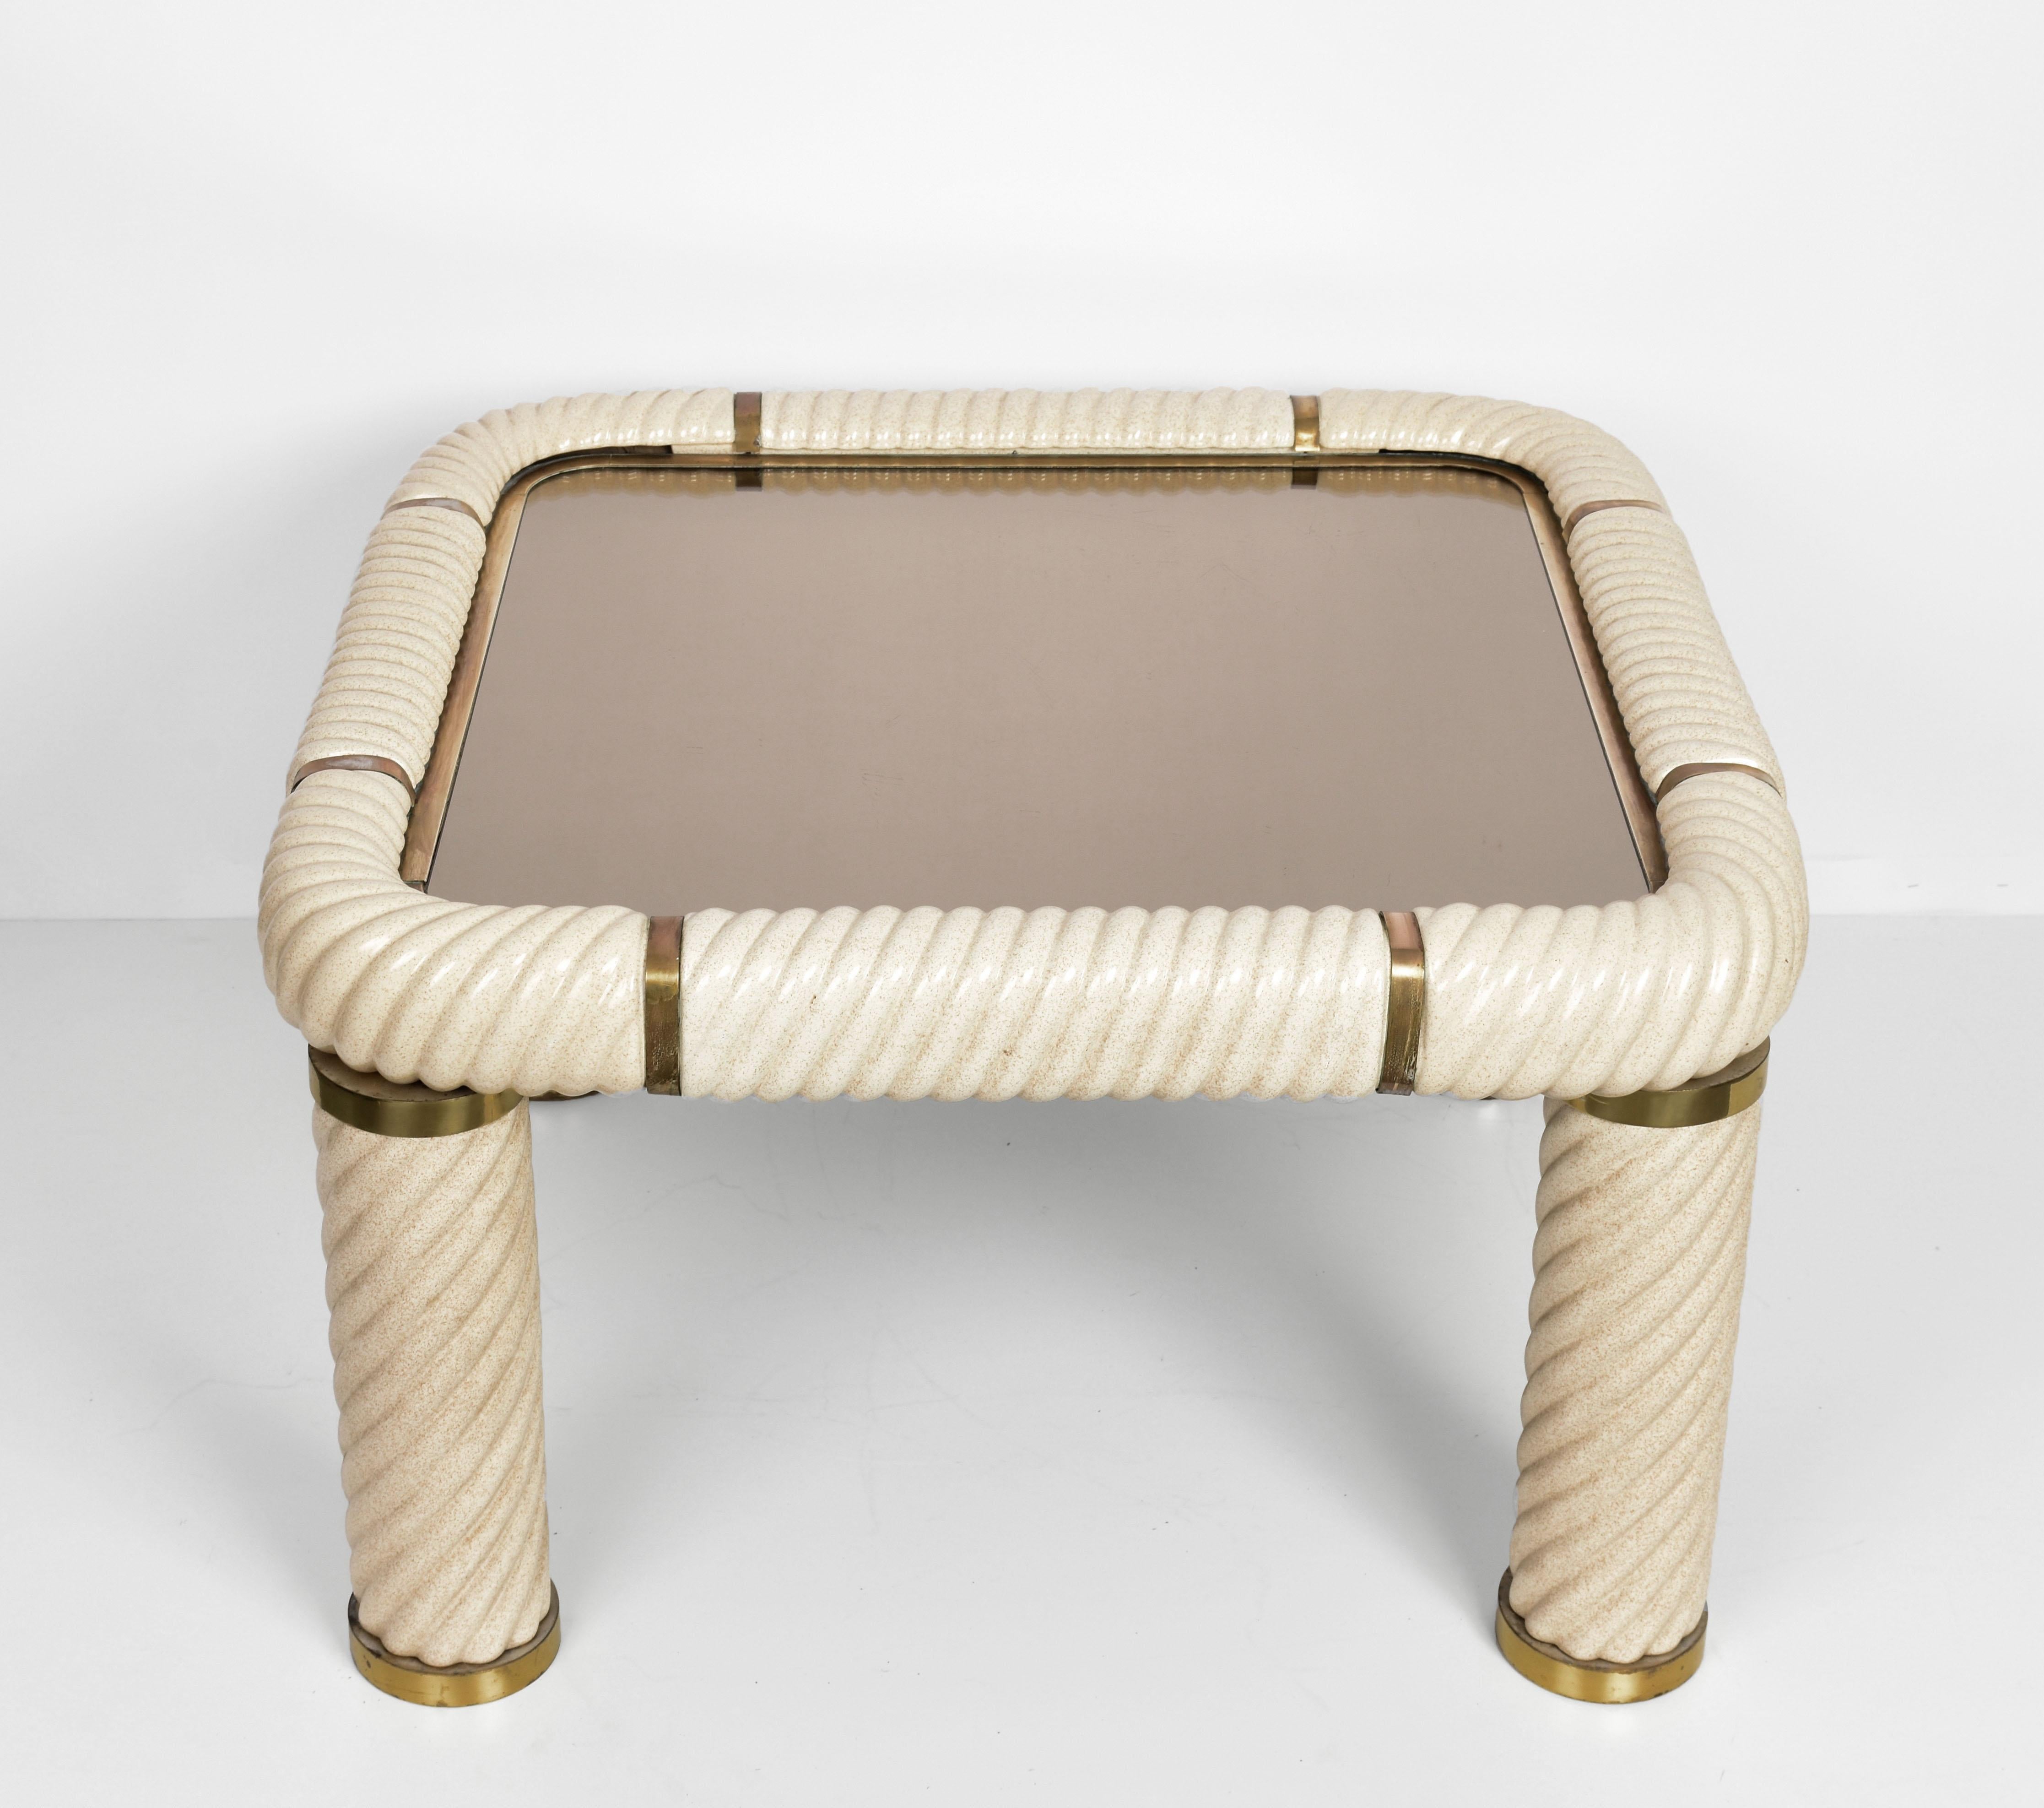 Amazing midcentury Hollywood Regency style ceramic brass and mirrored glass squared cocktail table. This wonderful item was designed in Italy during the 1970s and designed by Tommaso Barbi.

This remarkable piece features spiral-form ceramic